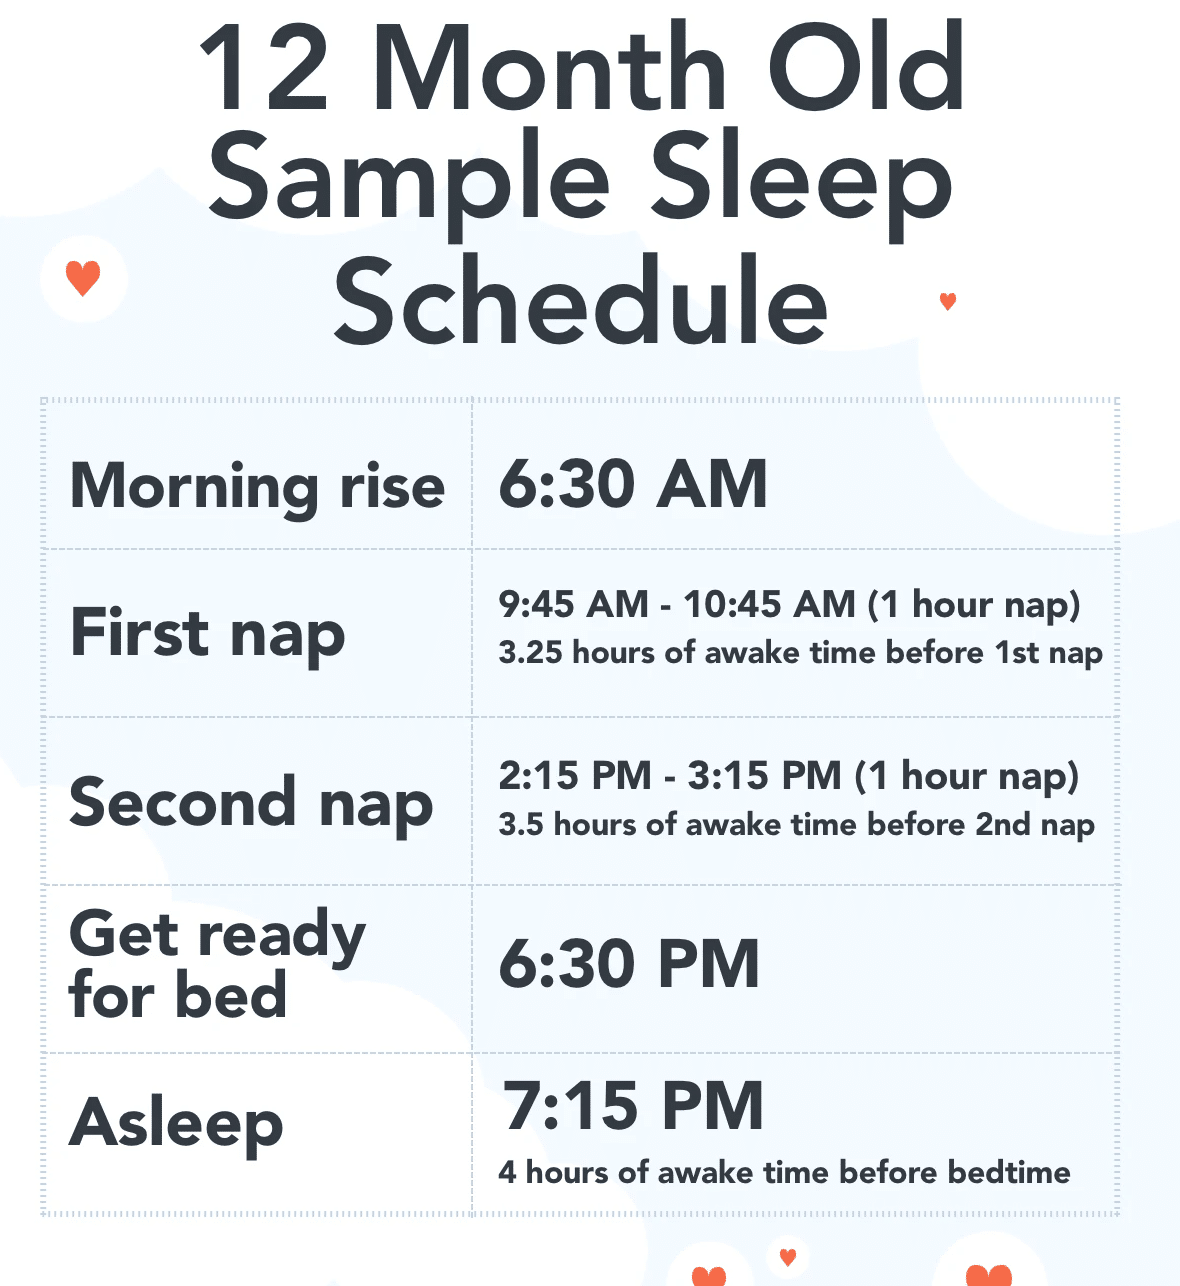 Sample sleep schedule for a 12-month-old baby, providing guidance on regulating their sleeping routine